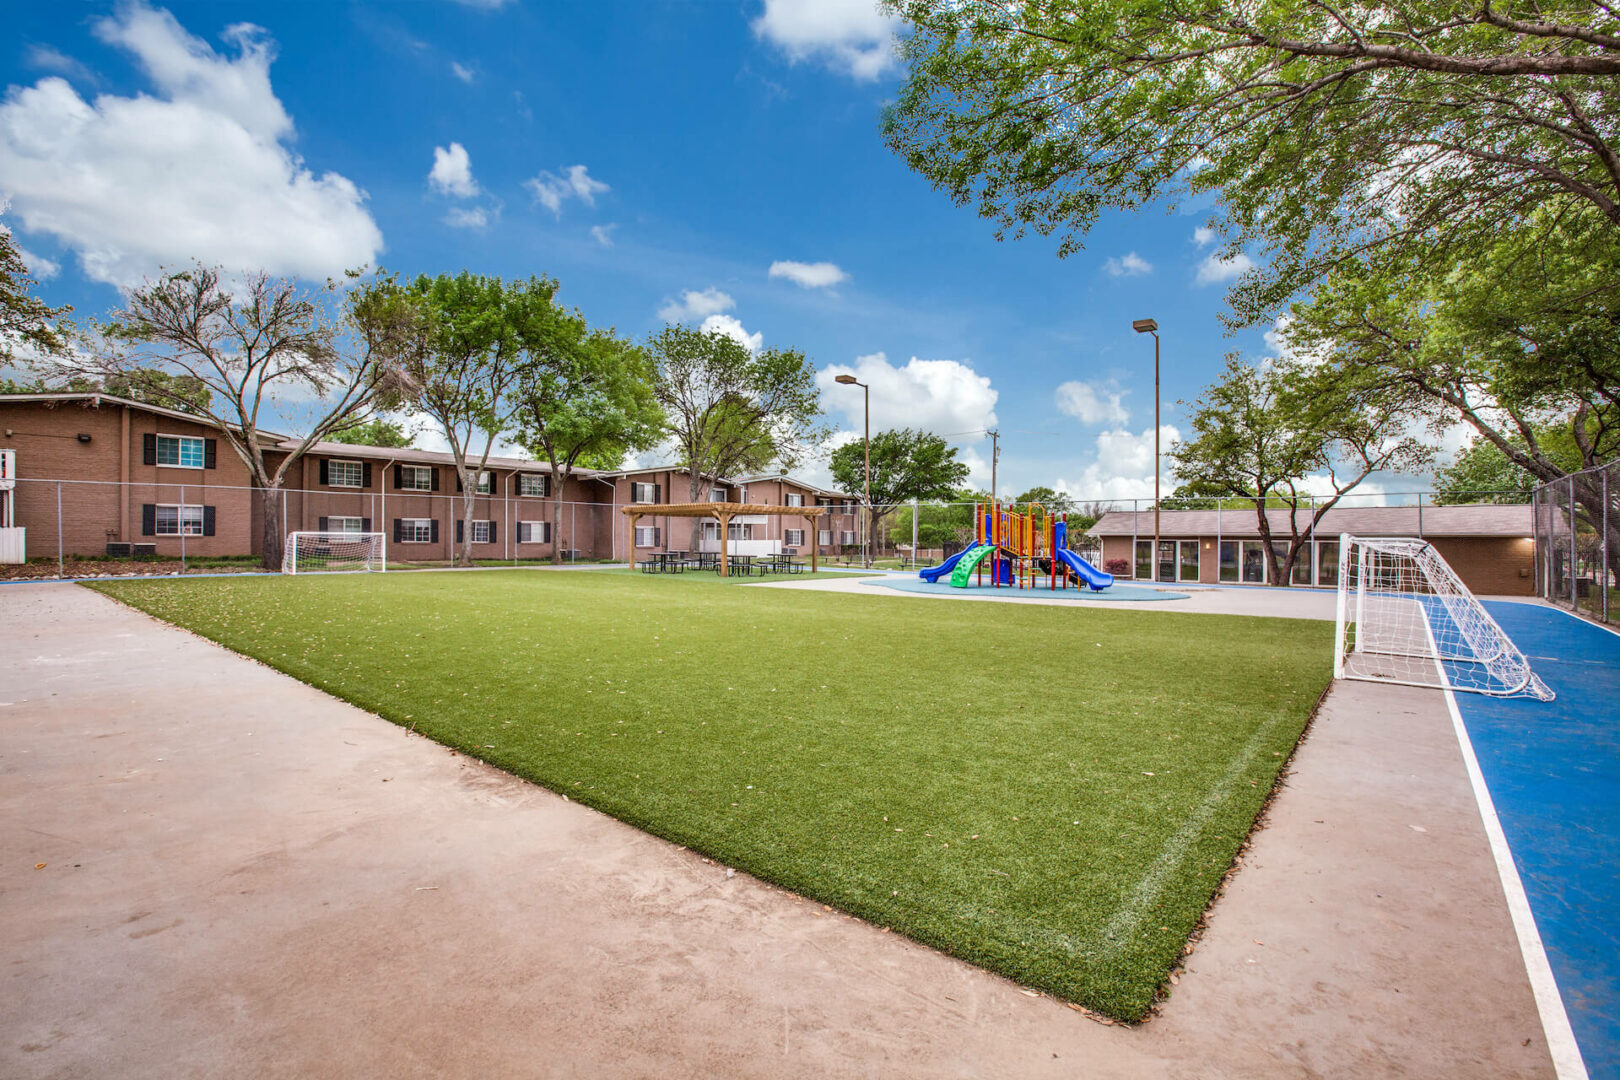 centralized sports court setup with soccer goals